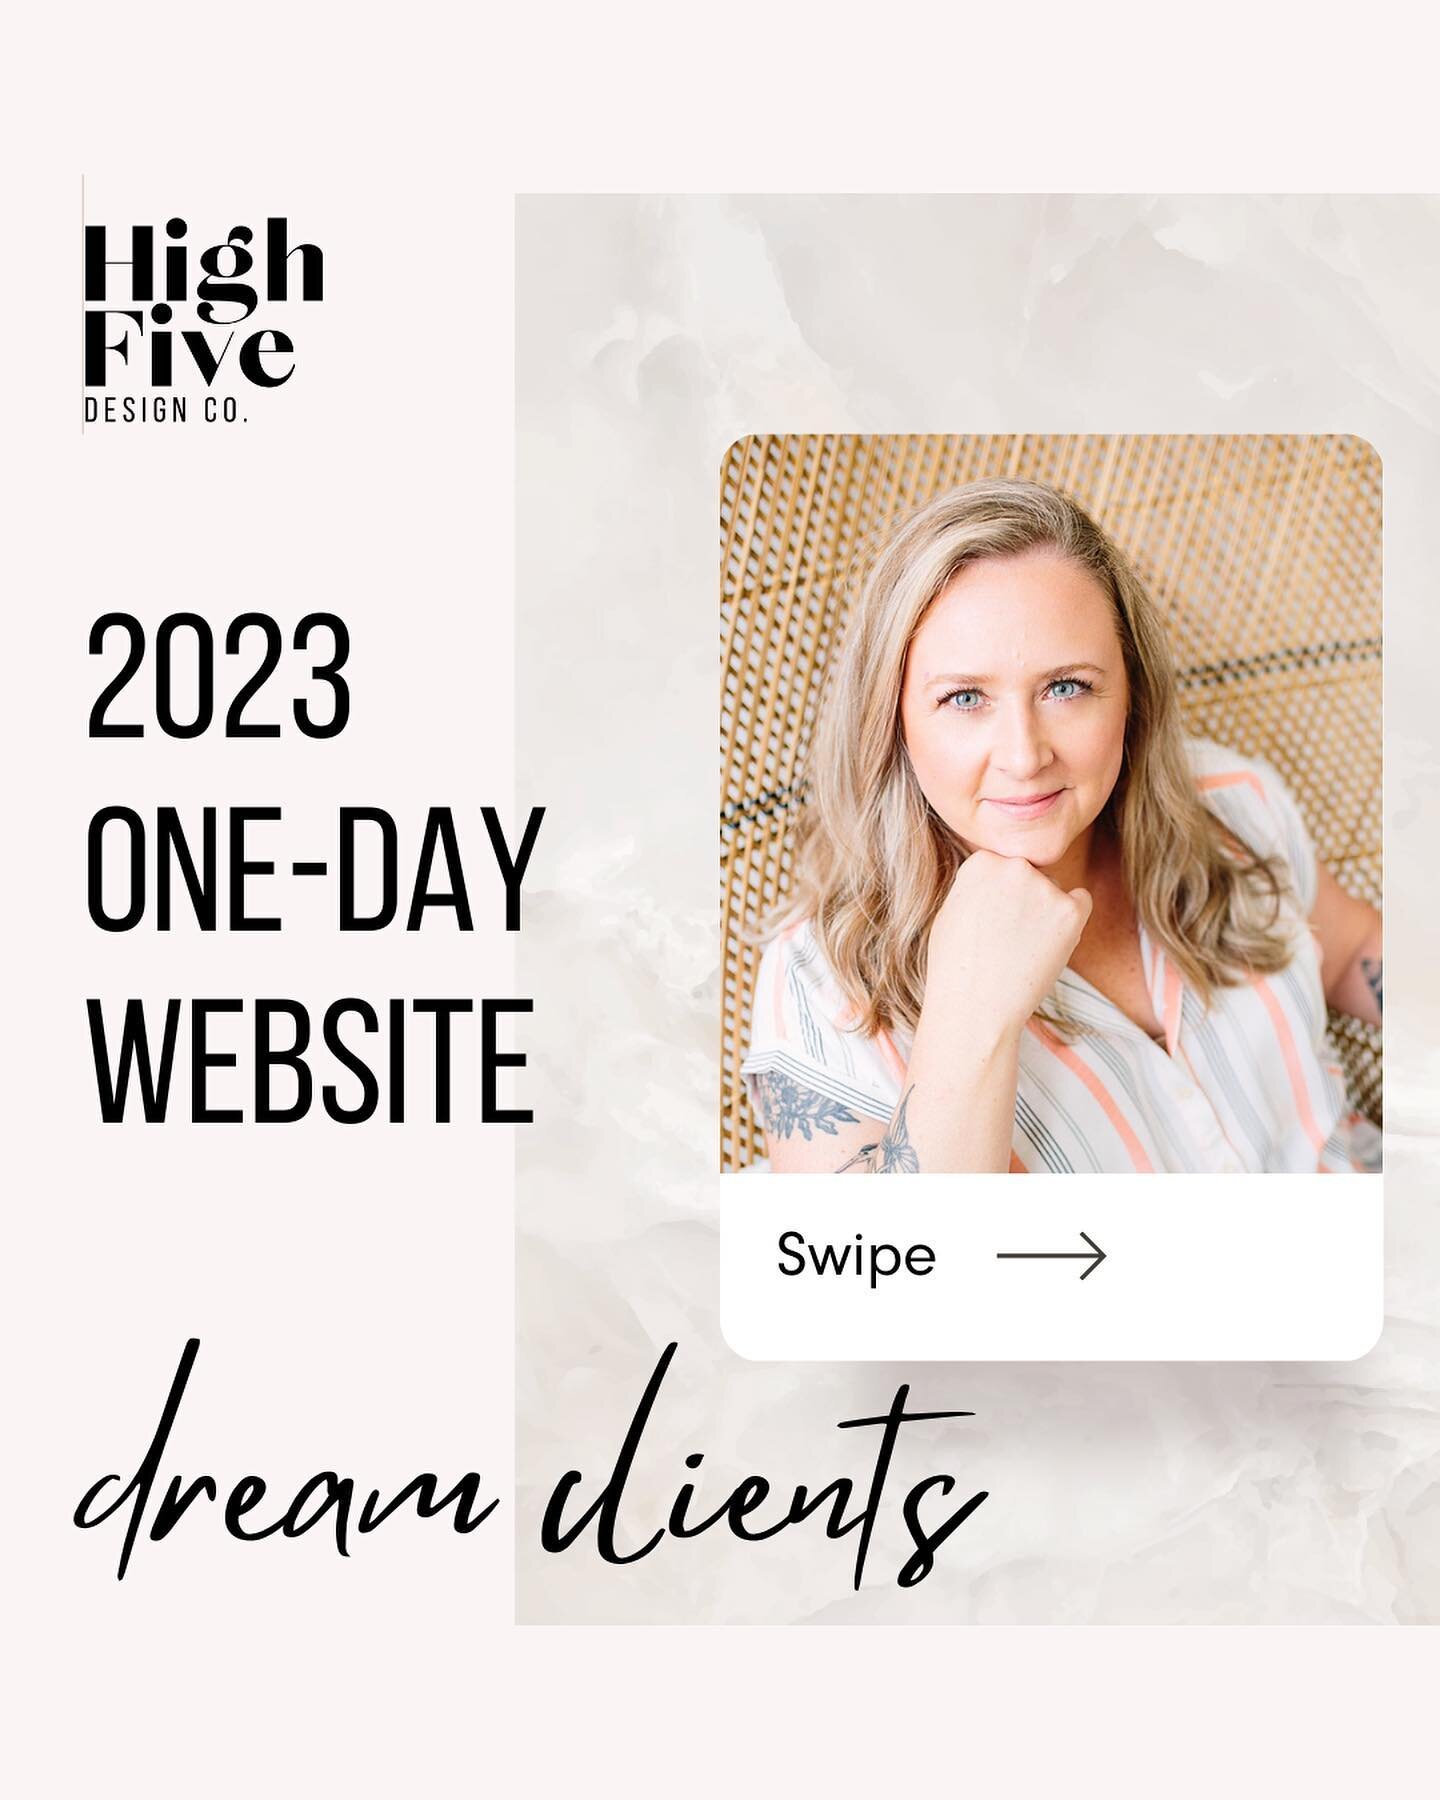 Now scheduling One-Day Websites through March 2023! 

There are a few spots left! 

#websitedesign #therapywebsite #therapistwebsite #privatepractice #therapist #coach #counselor